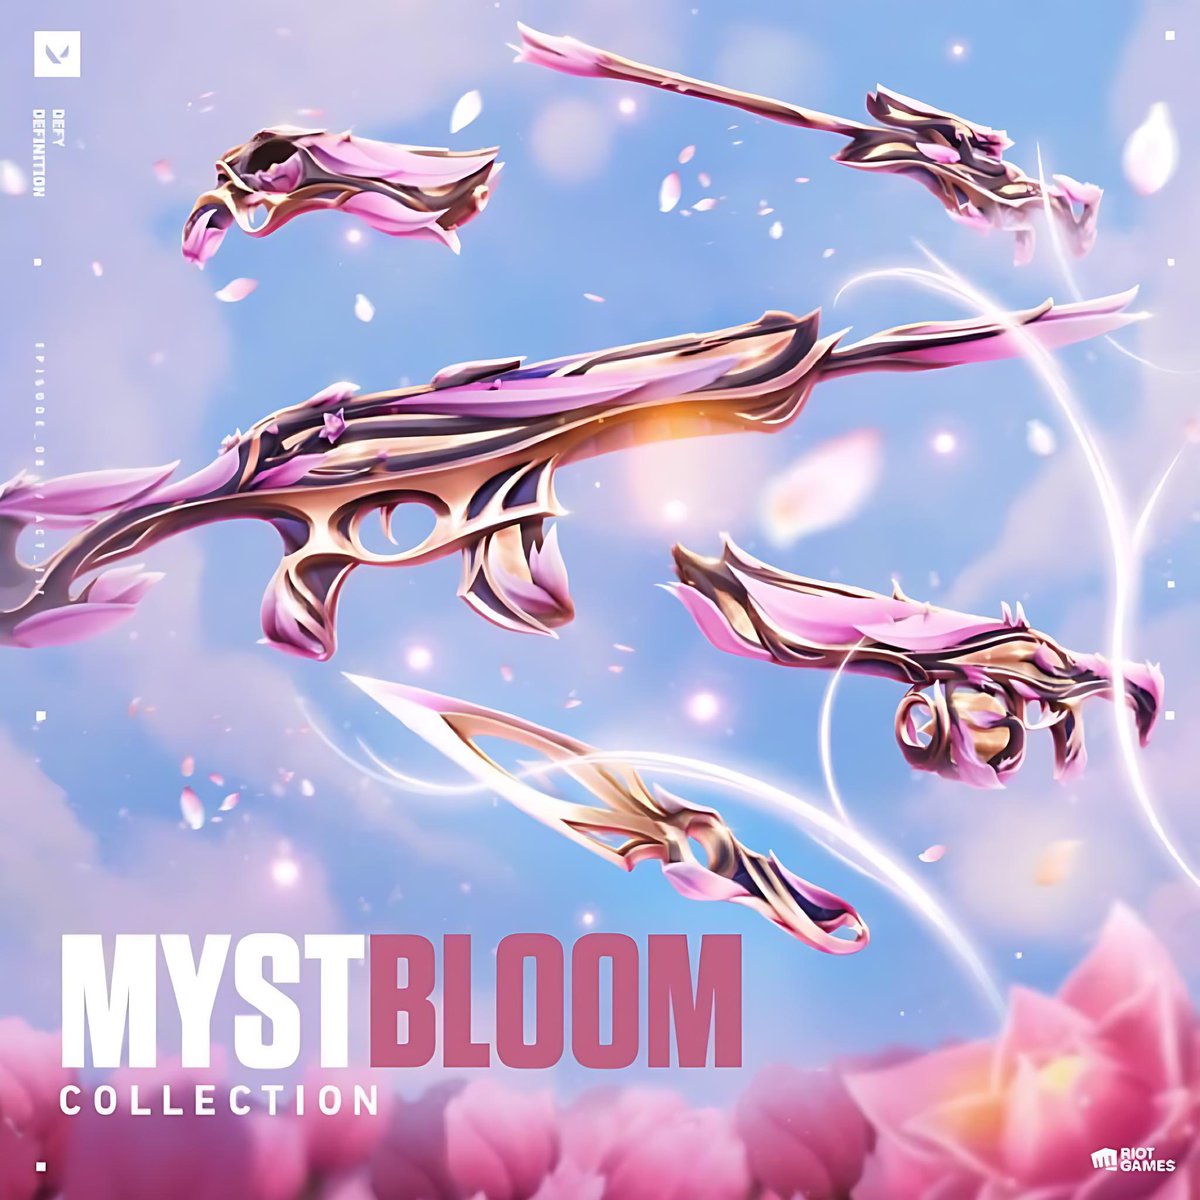 🌺 MYSTBLOOM BUNDLE GIVEAWAY! 🌺

To enter:
✅ Follow @AV8BrayV & @AV8Faction 
✅ Like and RT
✅ Tag 2 Friends

Ends May 15th | Goodluck #VALORANT